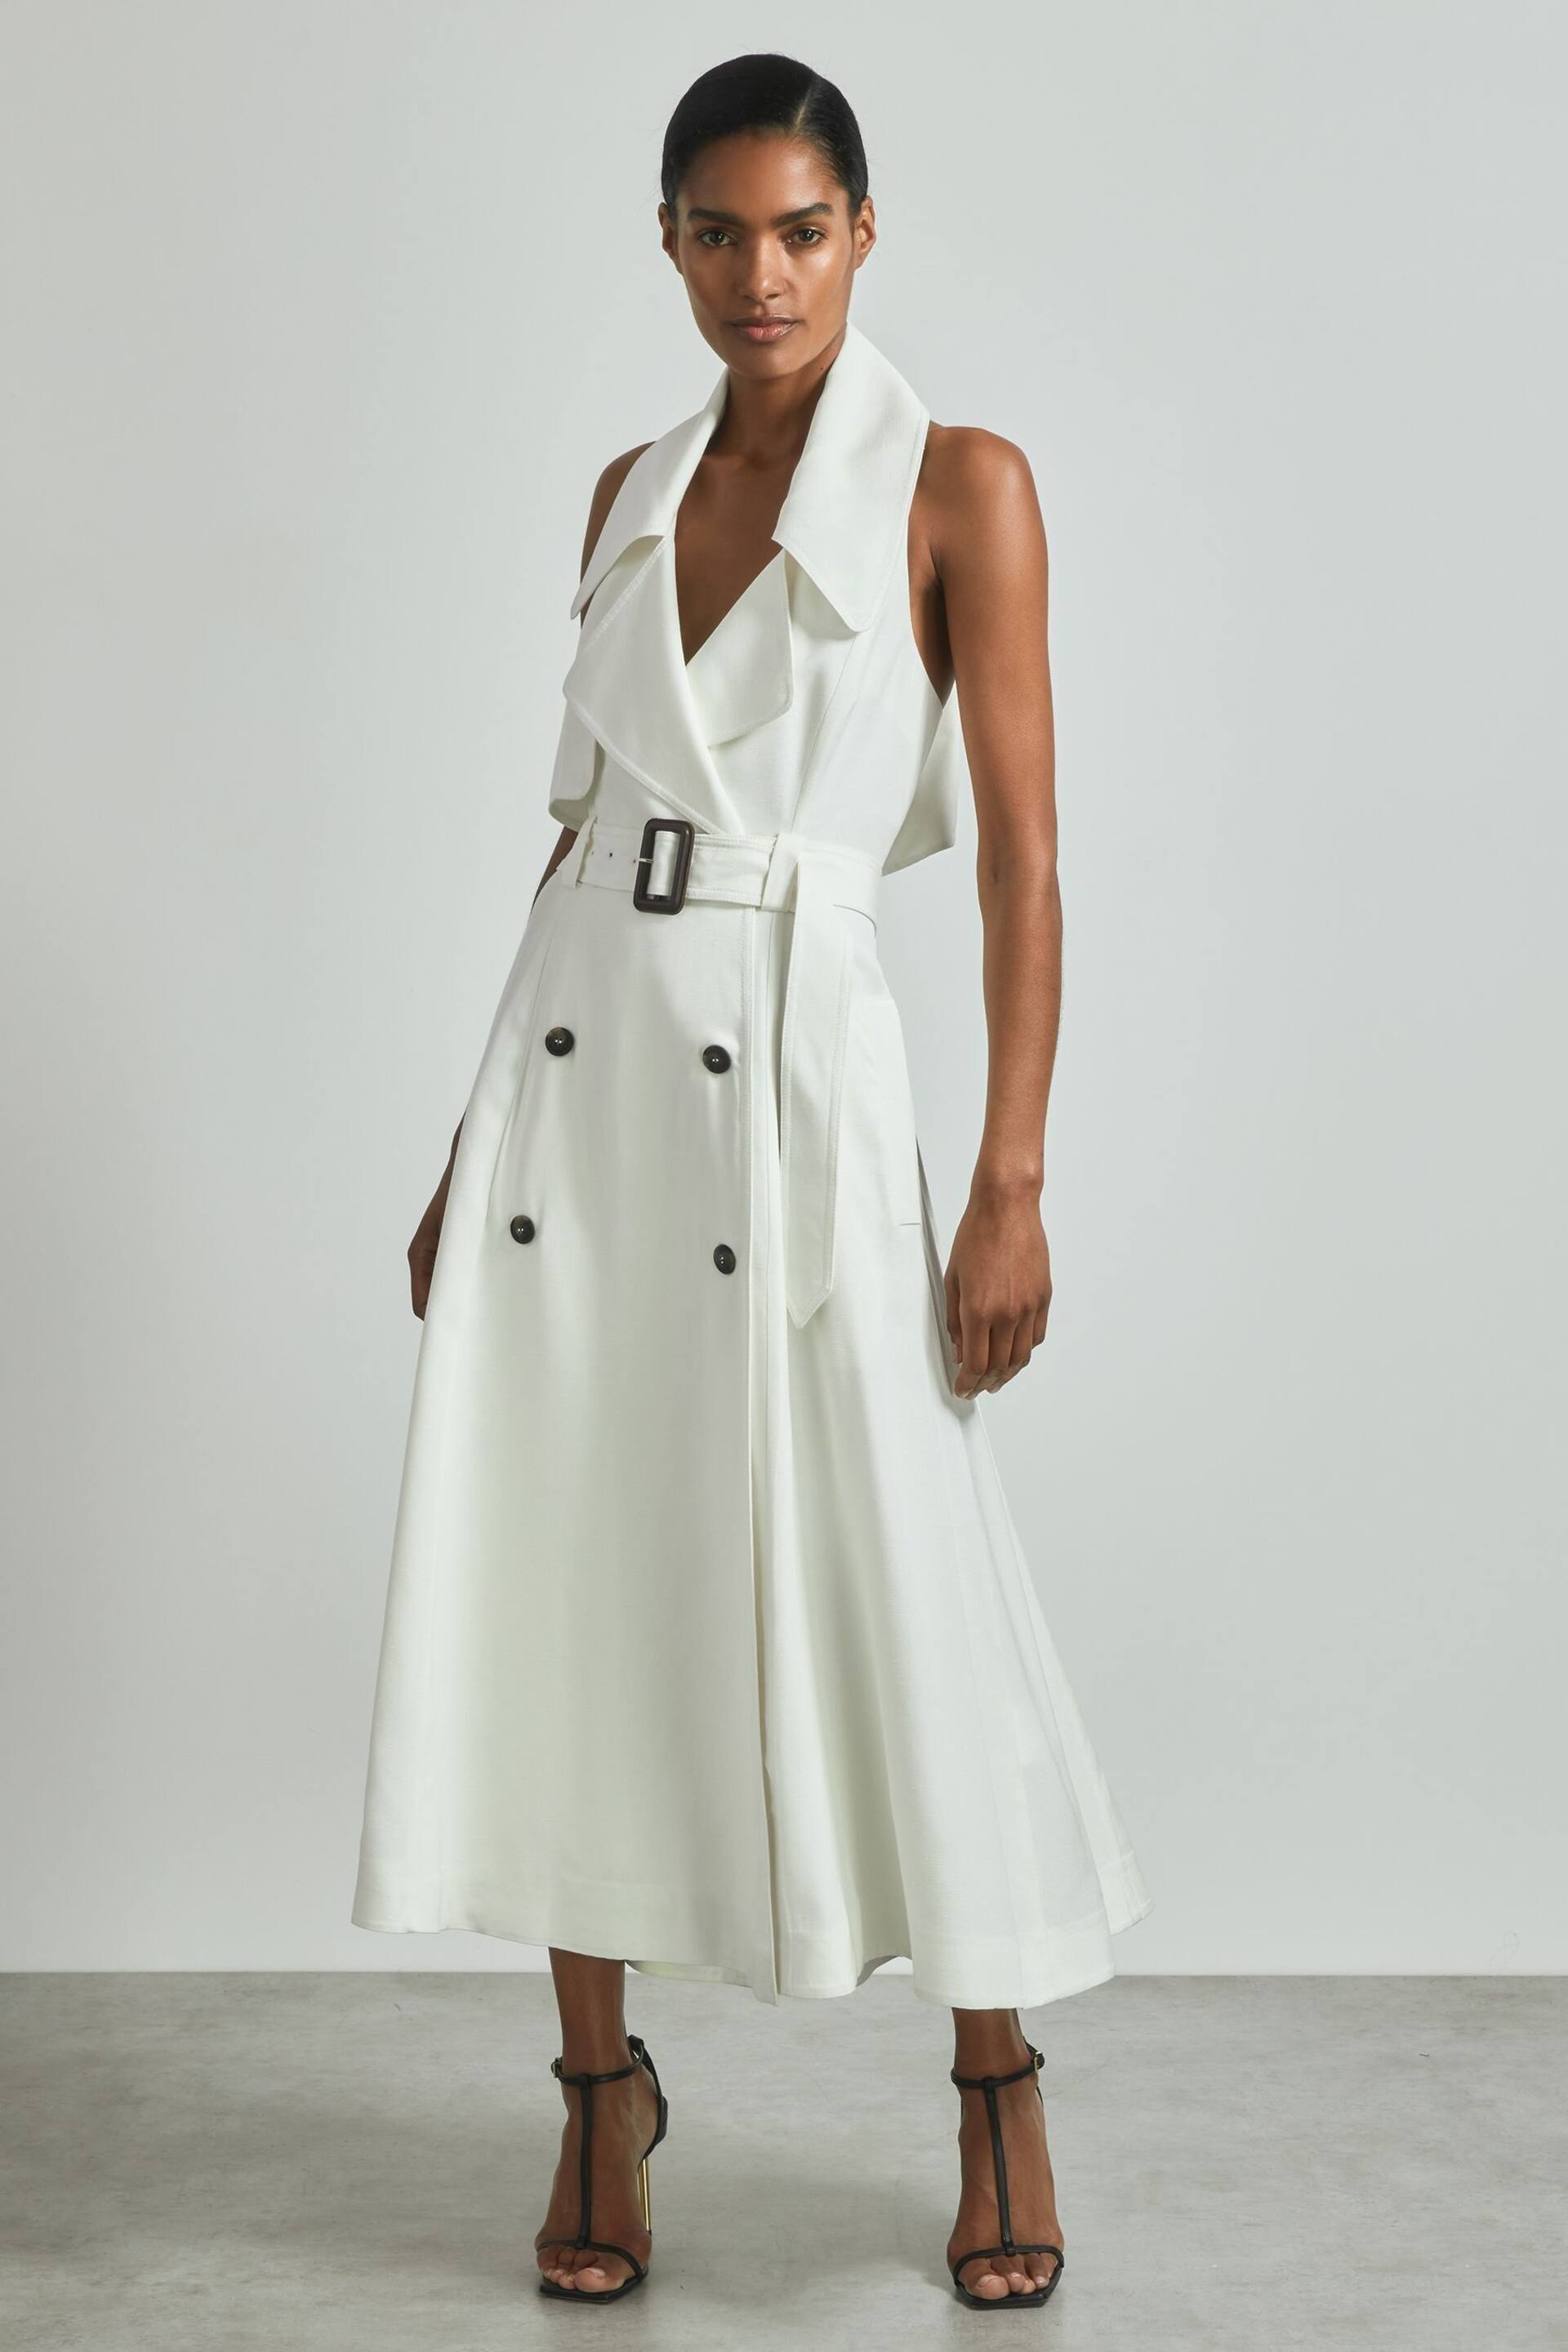 Atelier Italian Textured Wrap Dress with Silk - Image 4 of 6